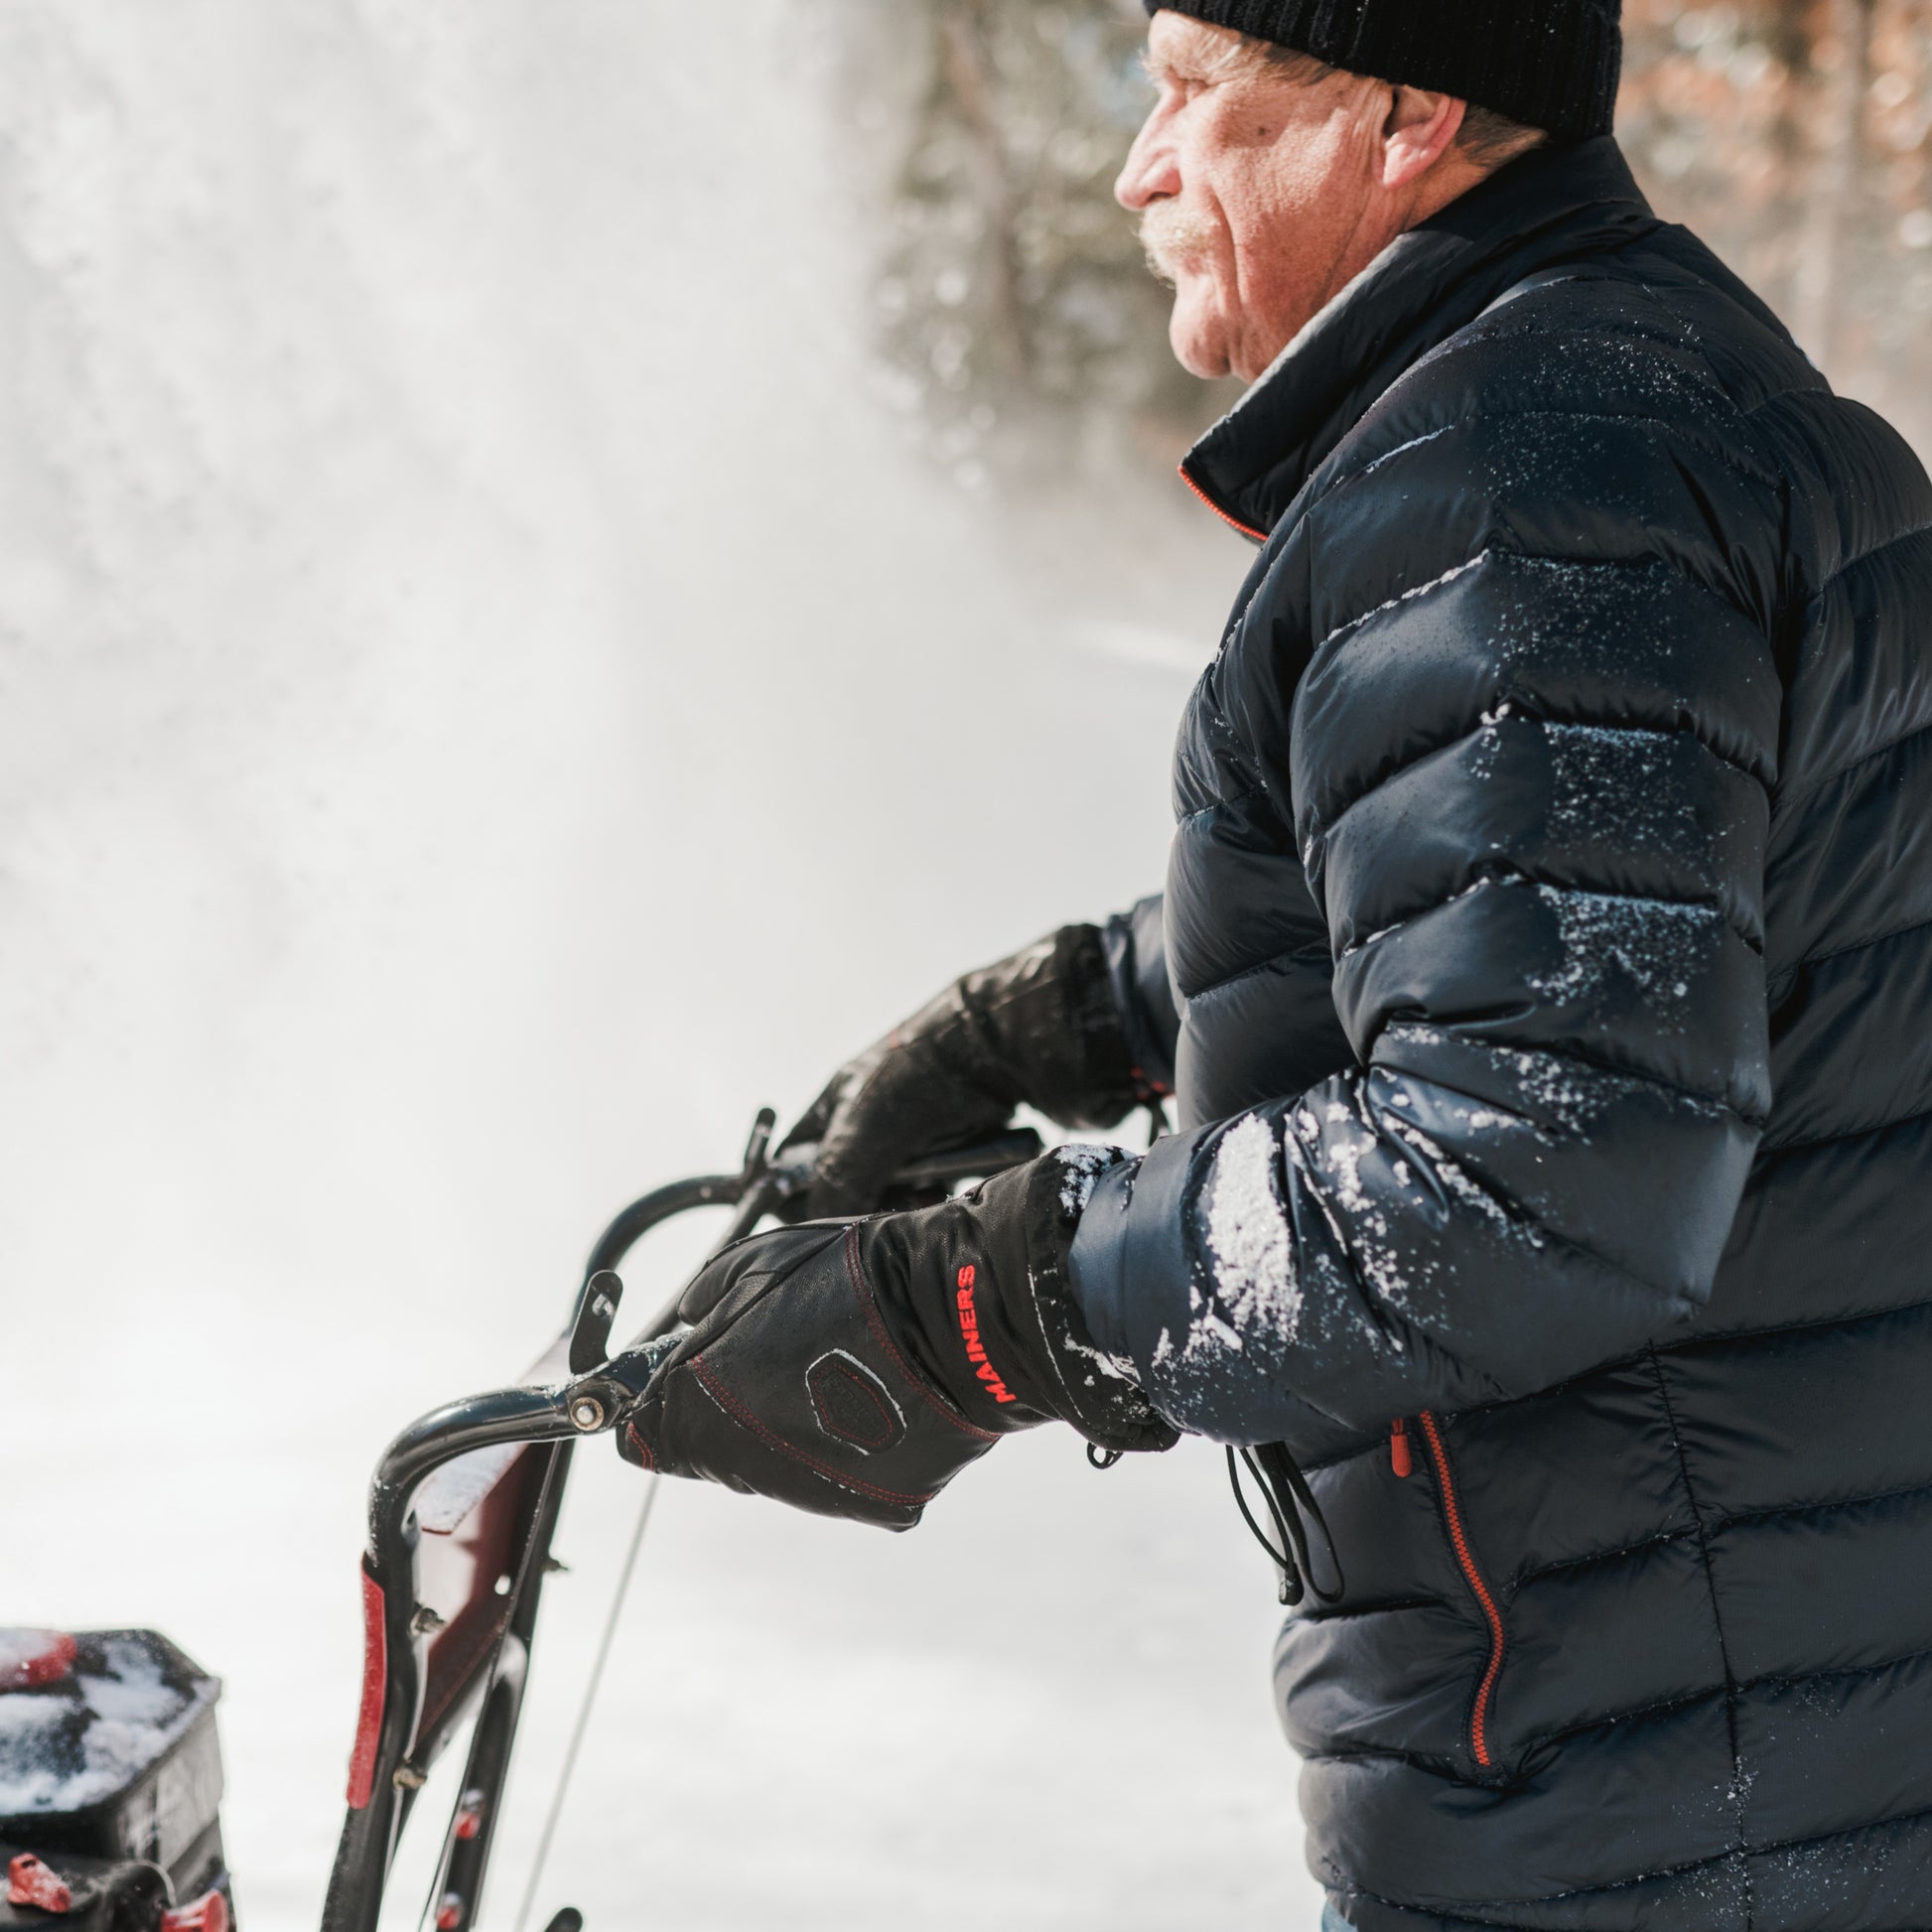 A man in a black leather coat and hat using a Mainers All-Leather Mitts snow blower in cold weather.